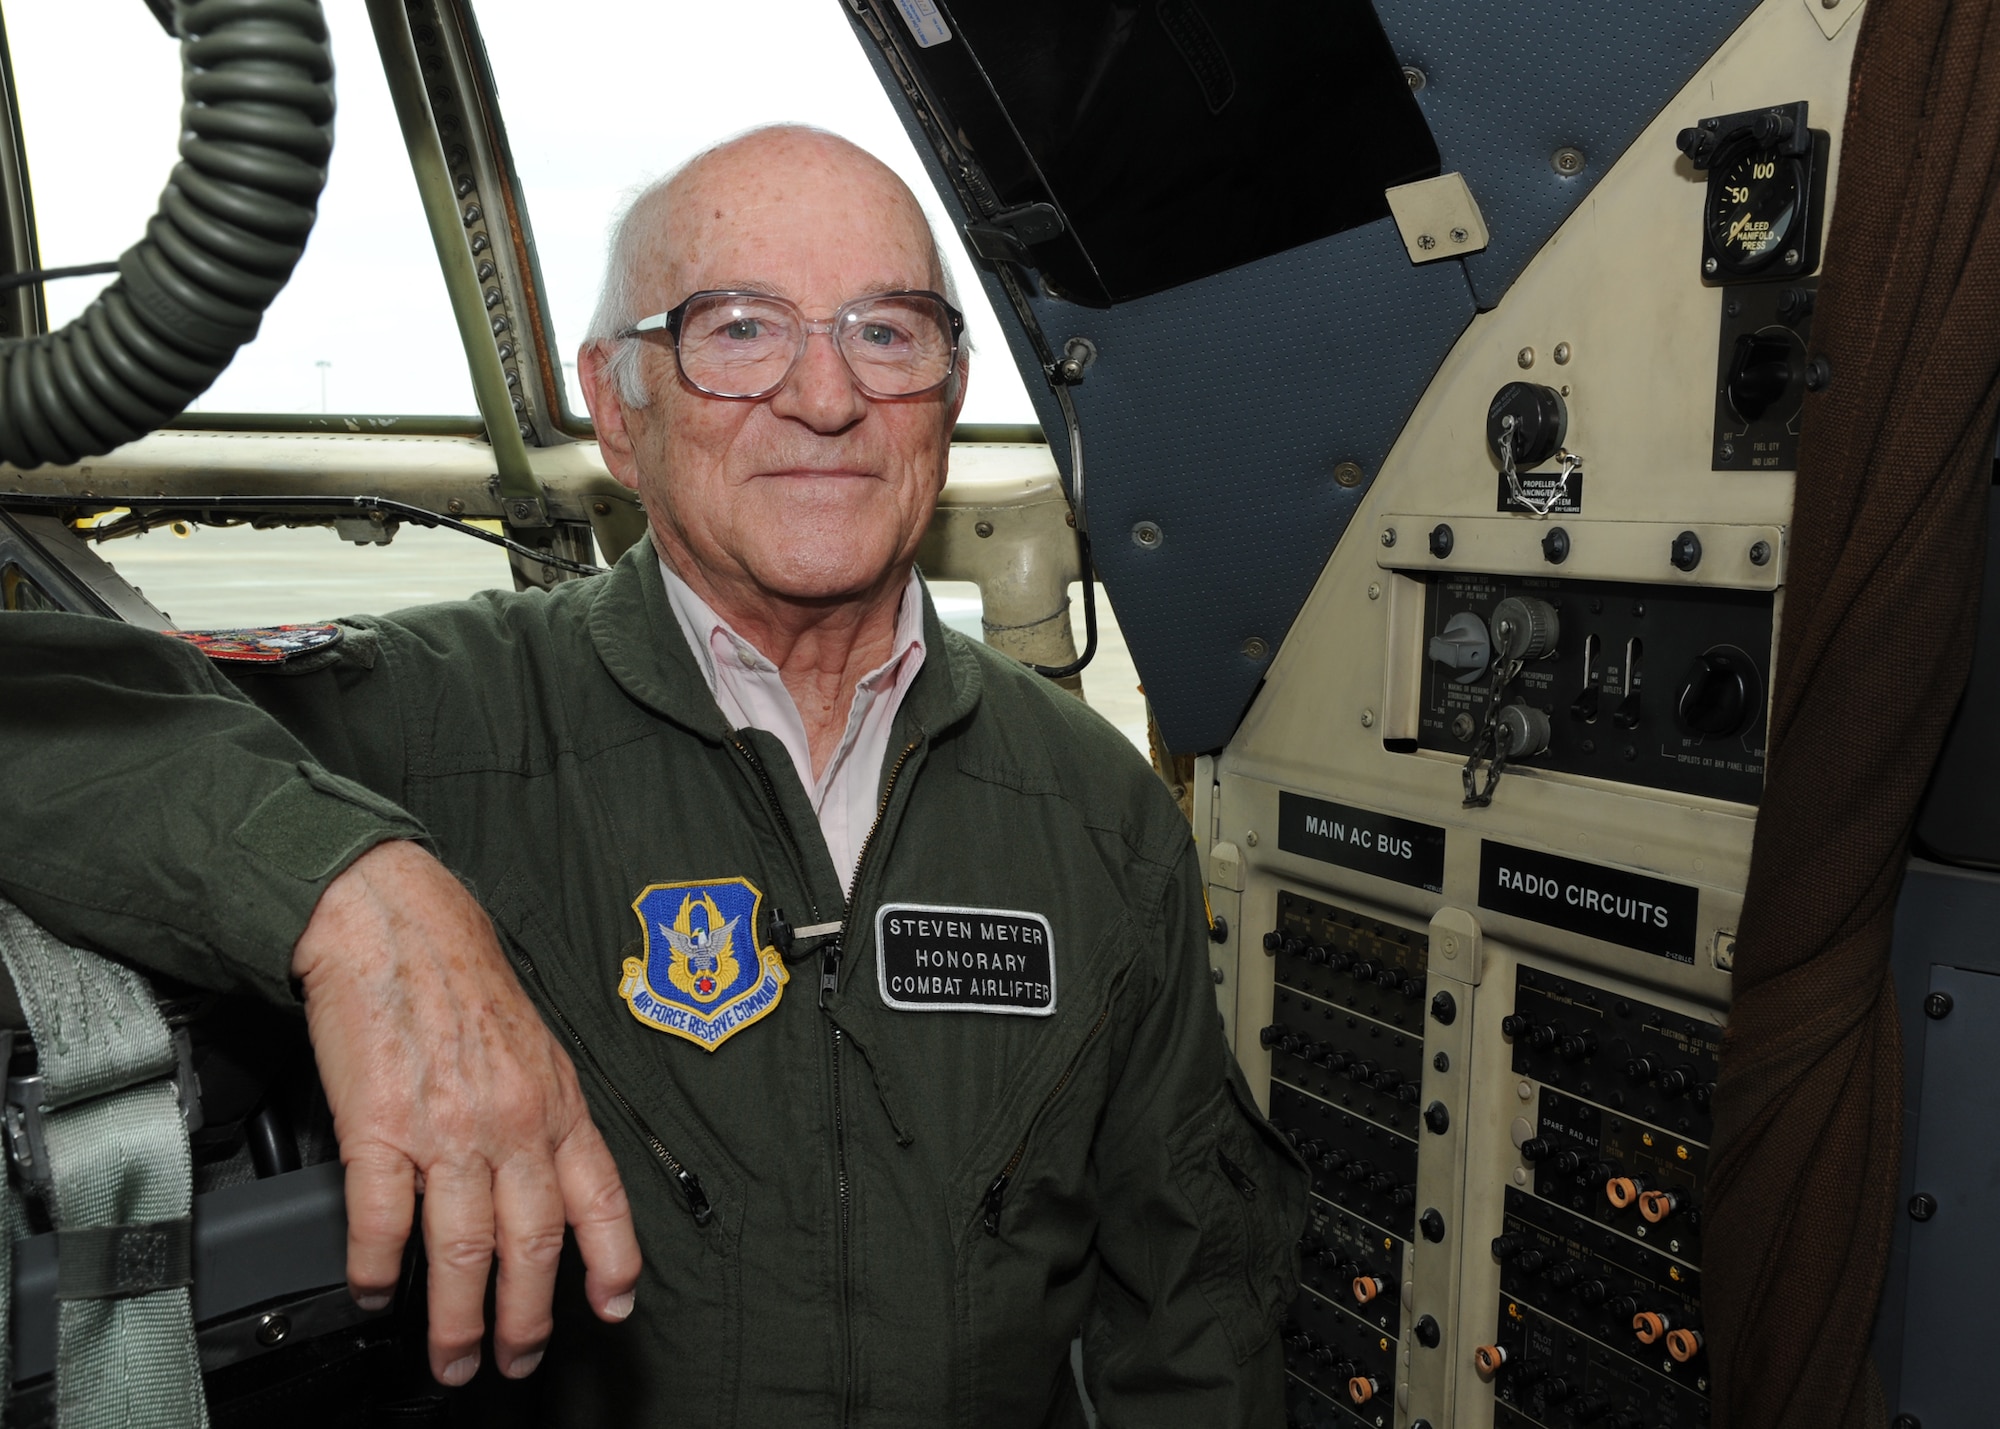 Steven Meyer, a World War II veteran, poses for a picture in the C-130H cockpit after he celebrated his 89th birthday and lifelong dream to marshal an aircraft into its parking location on Pope Field’s flightline on May 13, 2011.  Meyer served as a combat engineer in the European Theater of Operations and assisted in the planning of the D-Day invasion at Normandy.  The event was coordinated through Jeremy Bloom’s Wish of a Lifetime foundation, Brookdale Senior Living and the Airmen of the 440th Airlift Wing.   “This is beyond my wildest dreams,” said Meyer, “and, by all accounts my reviews were very positive.  I believe I did quite well.”  (U.S. Air Force photo by Staff Sgt. Peter R. Miller)